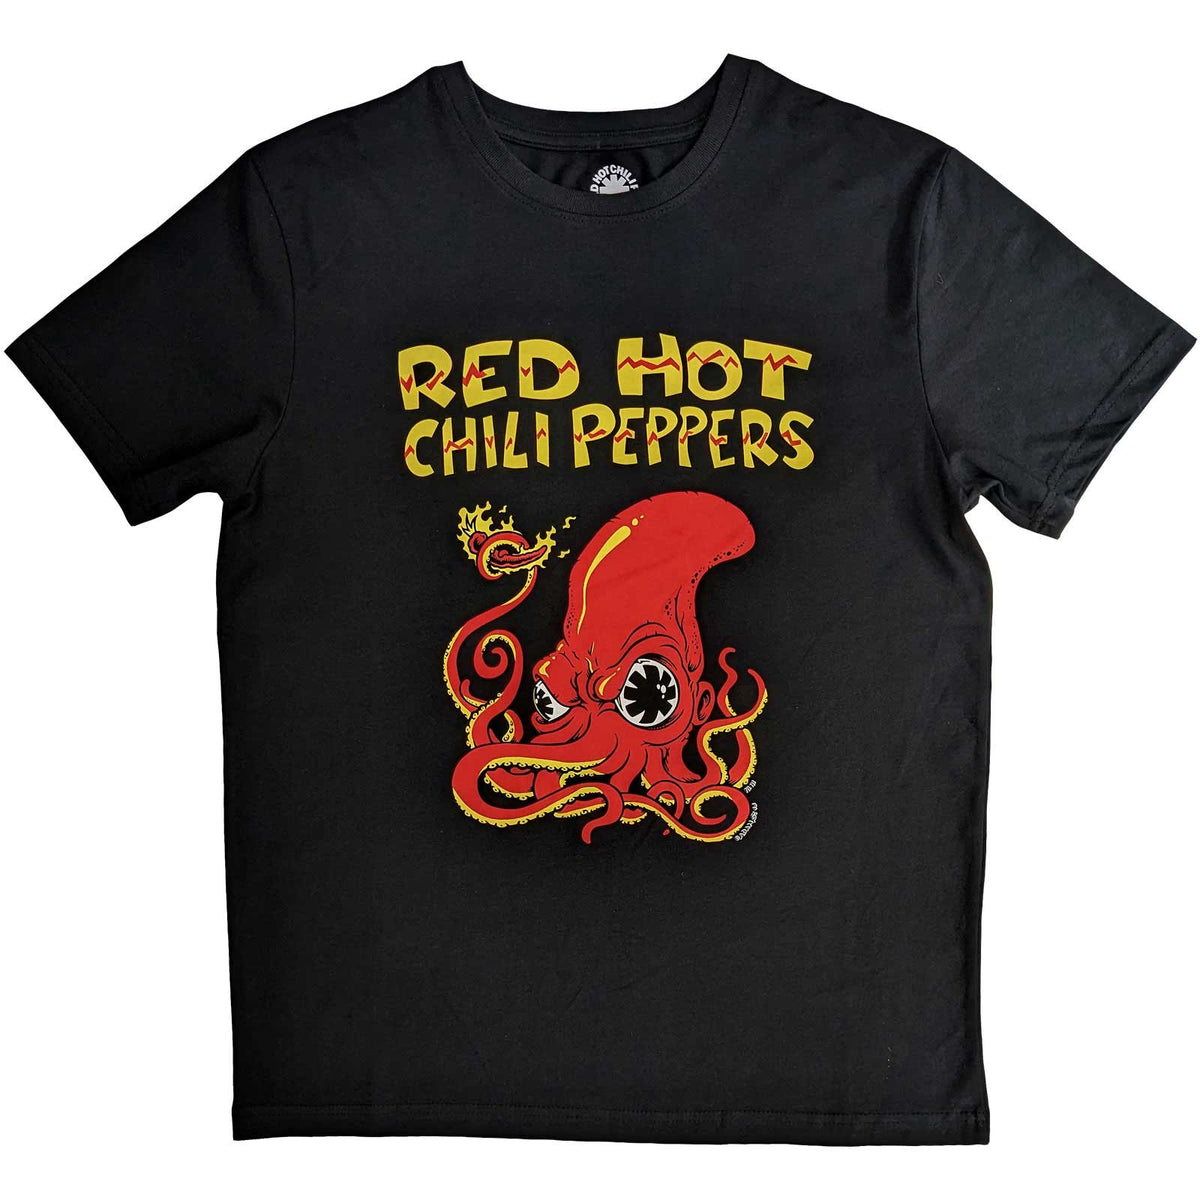 Red Hot Chili Peppers Octopus Black Tee